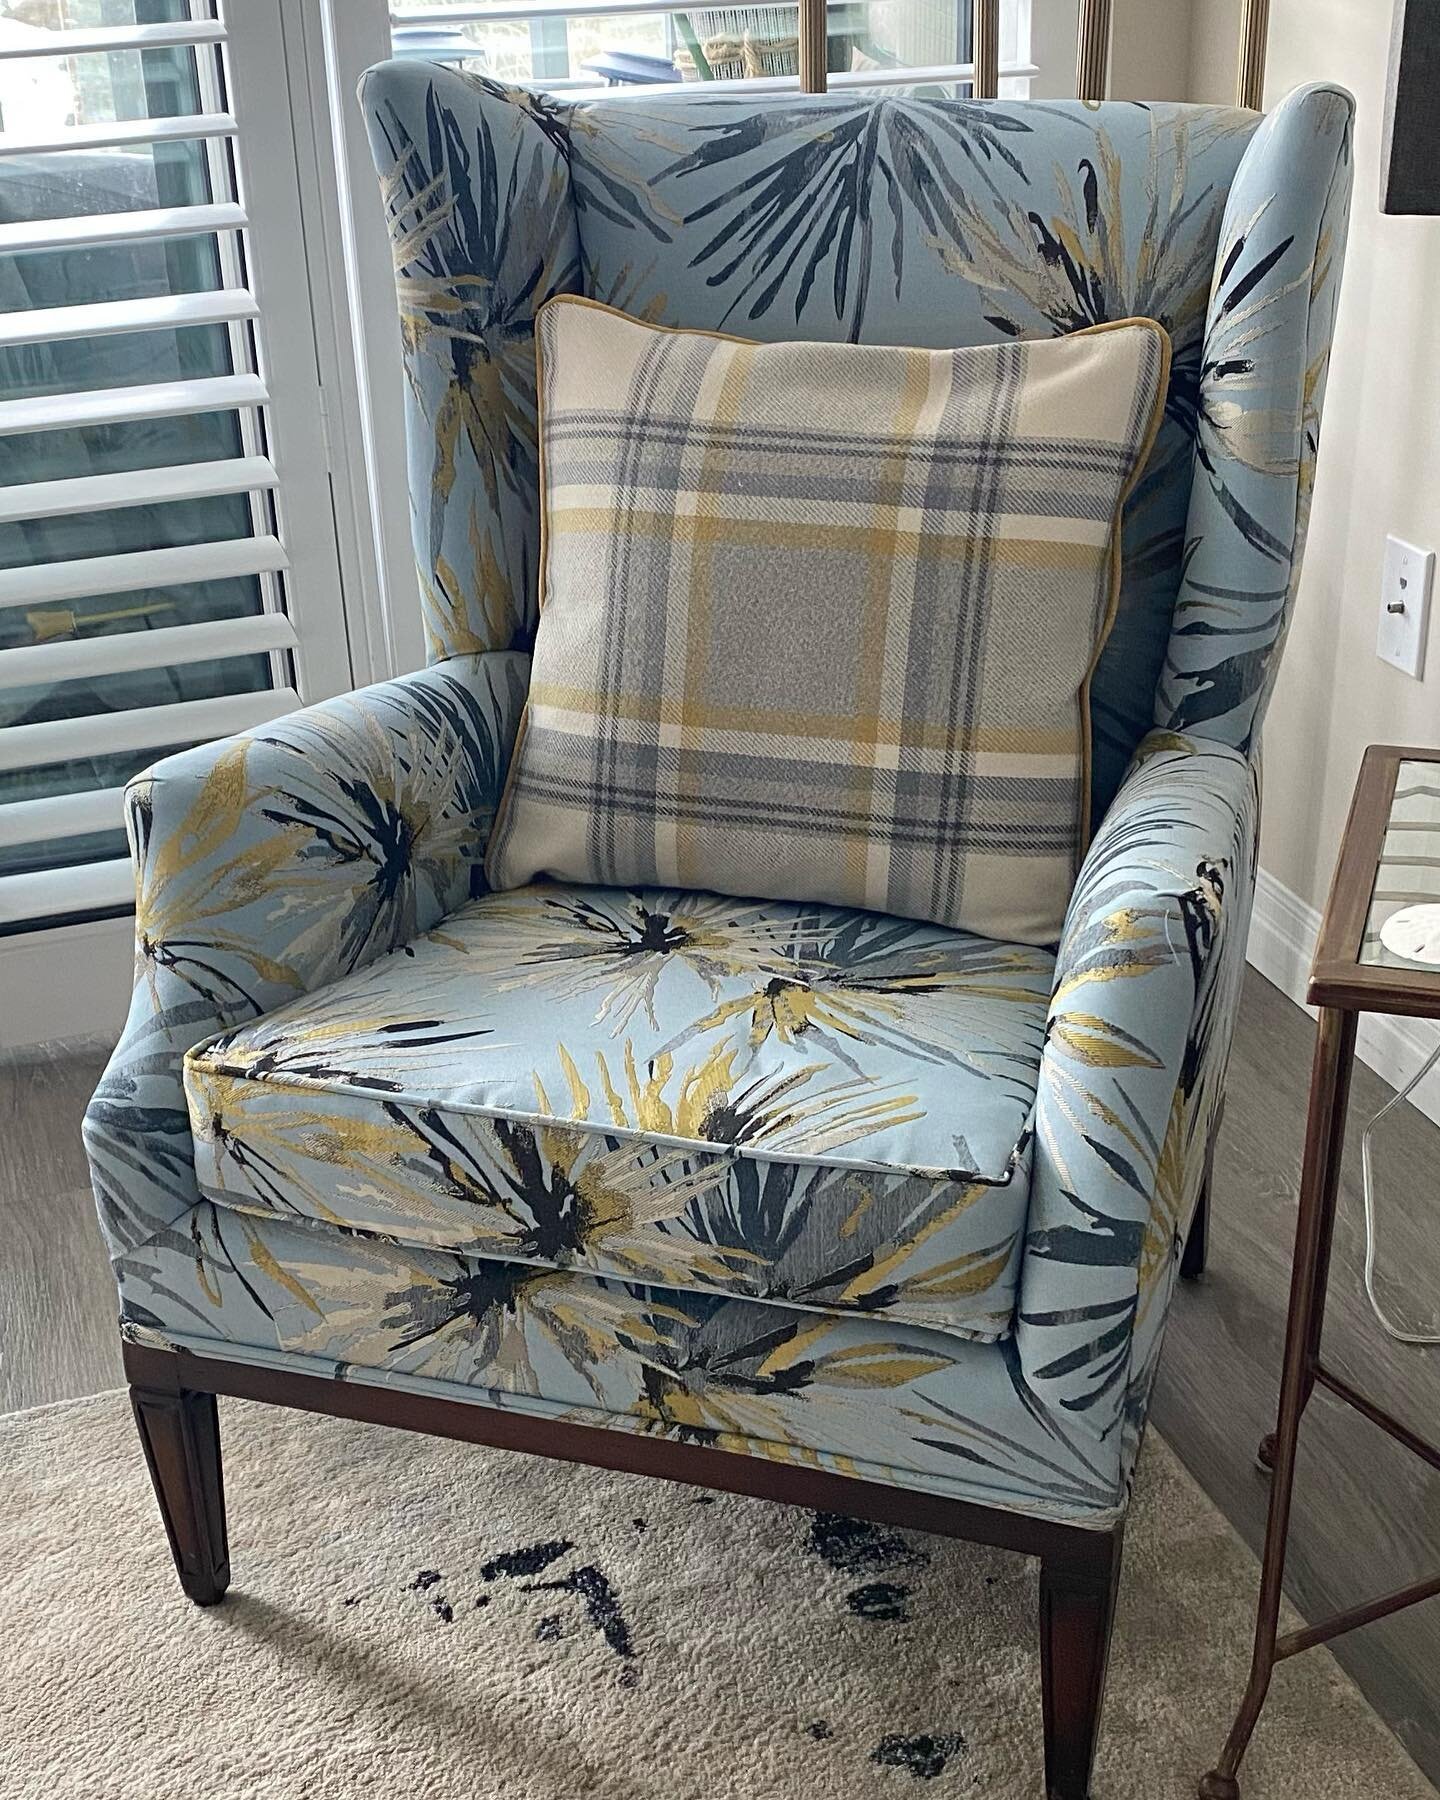 🌸 ☀️ Spring is in the air! When clients take the designer out of their comfort zone. A recent decor project for a lovely client. We reupholstered two dated wing chairs and made some new pillows. Currently working on paint and wallpaper.  Swipe to th